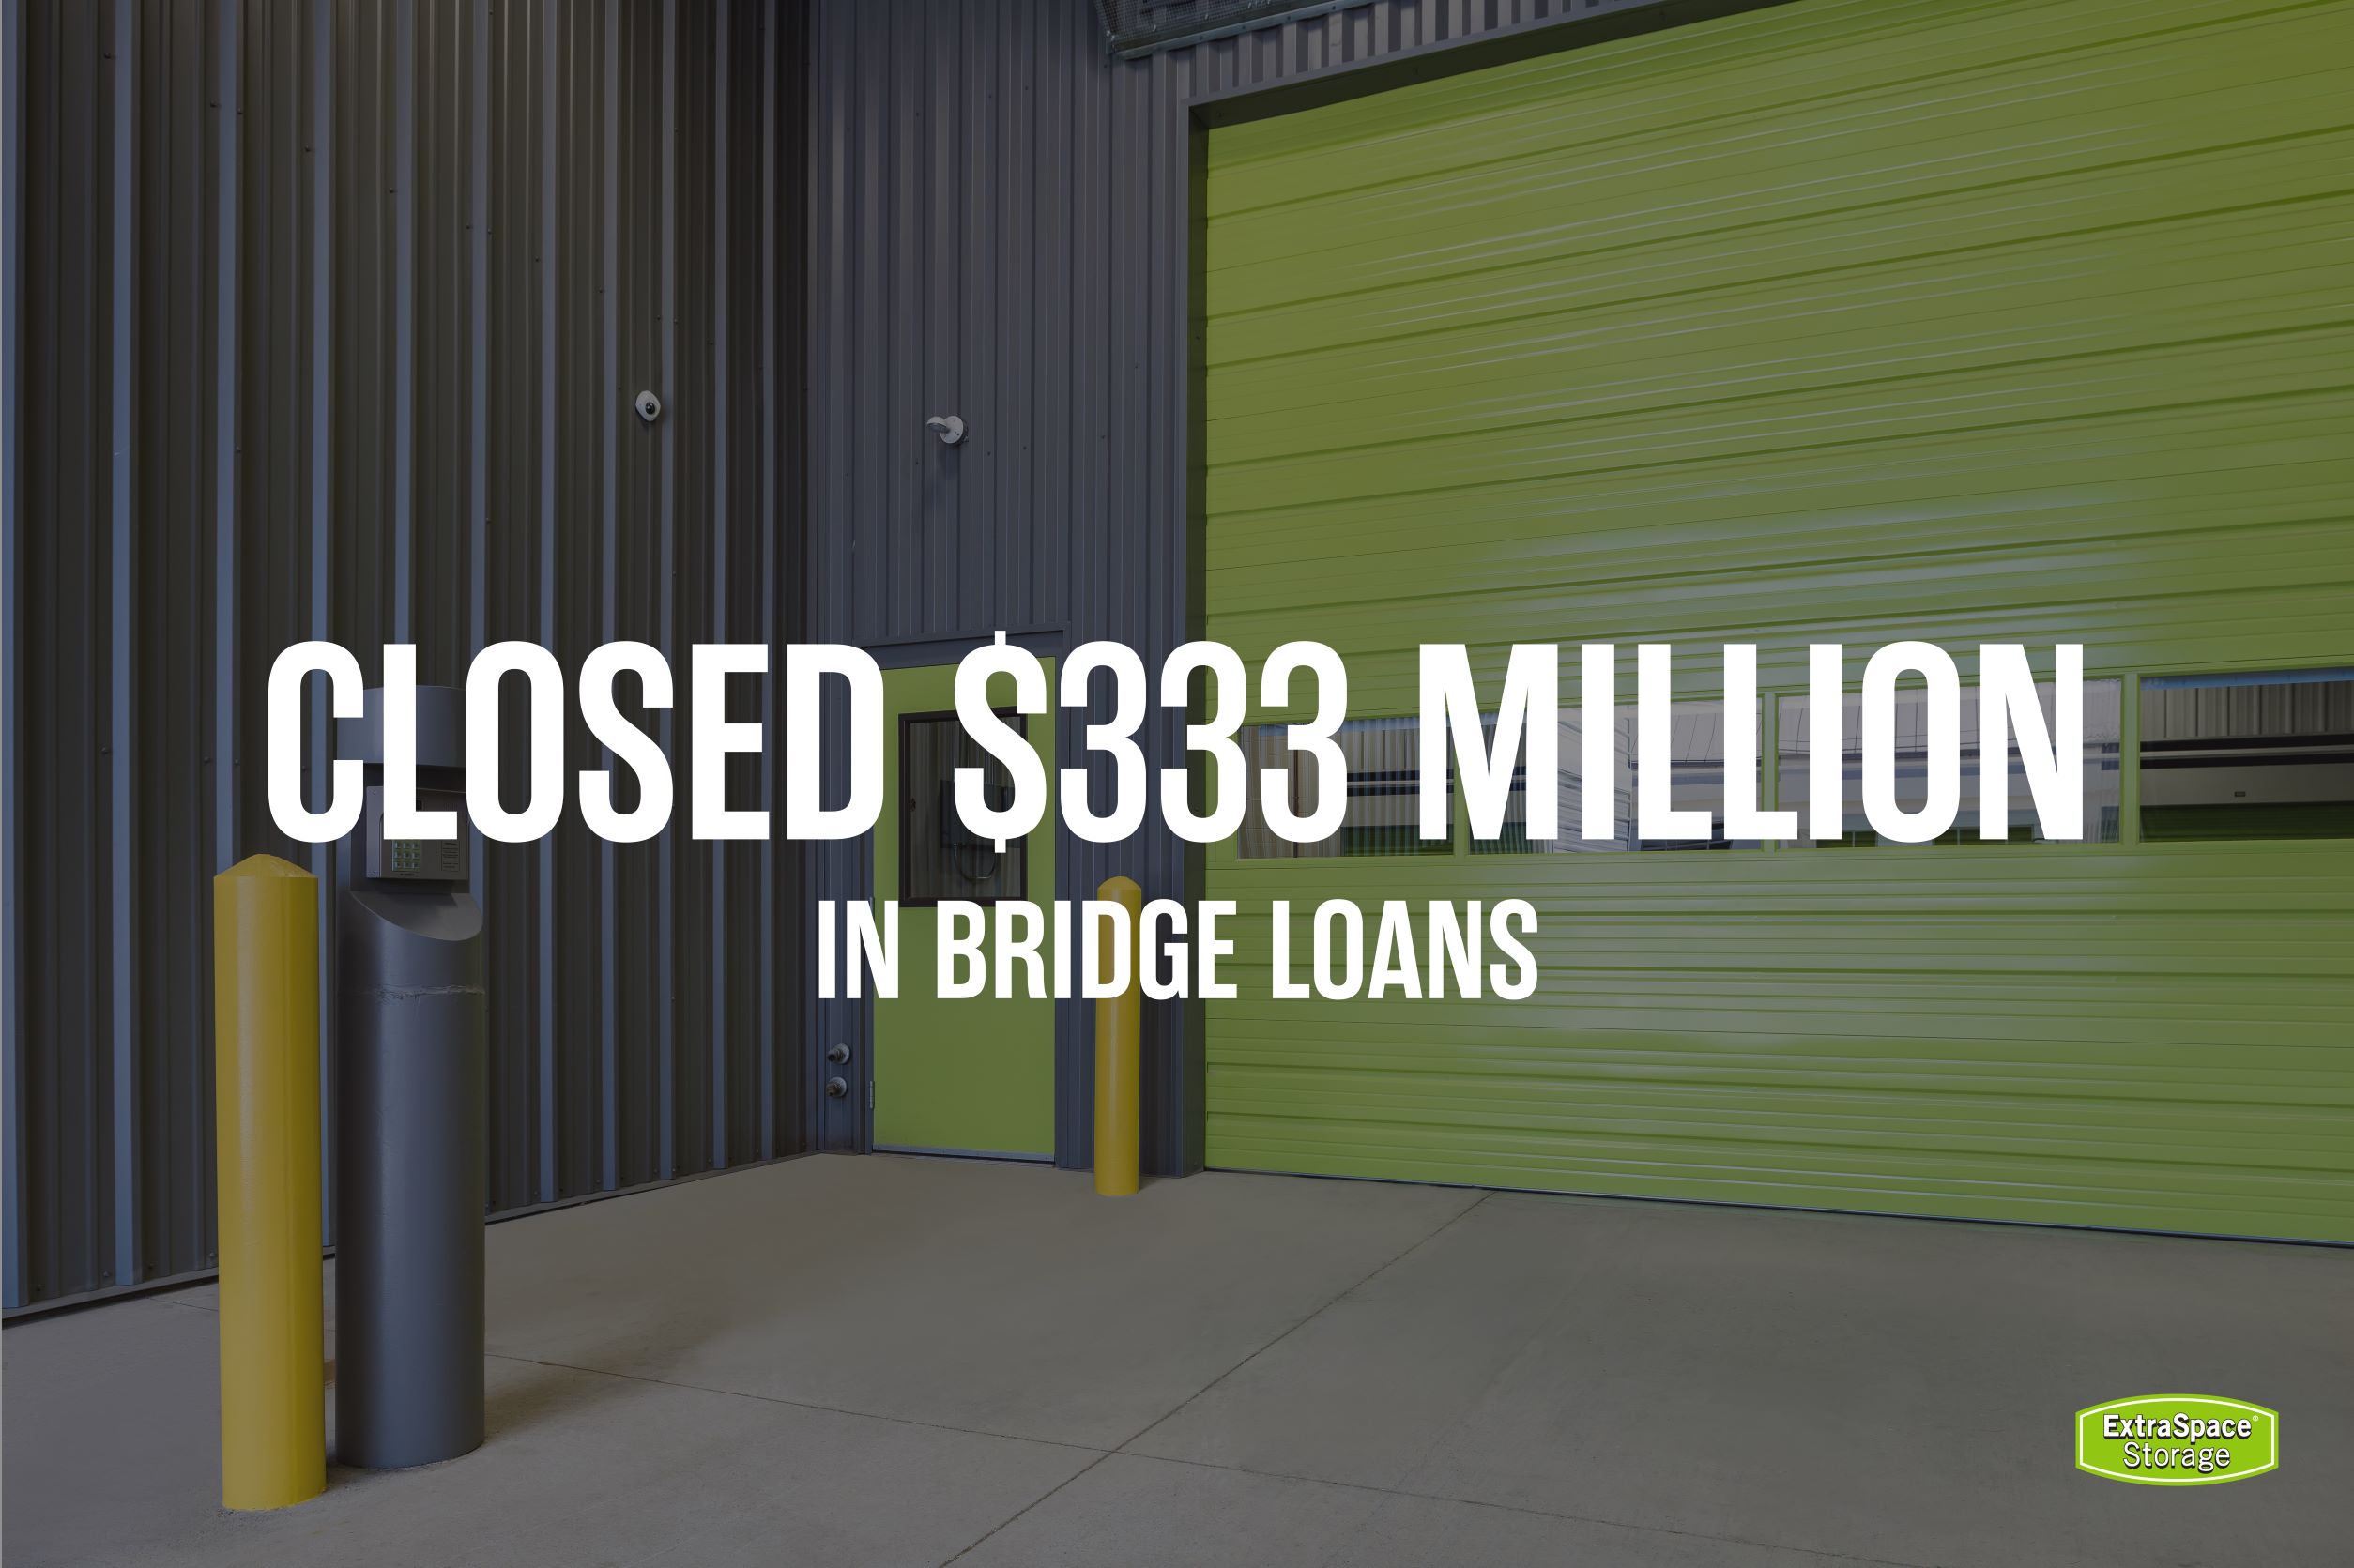 Graphic with text "Closed $333 Million in Bridge Loans"